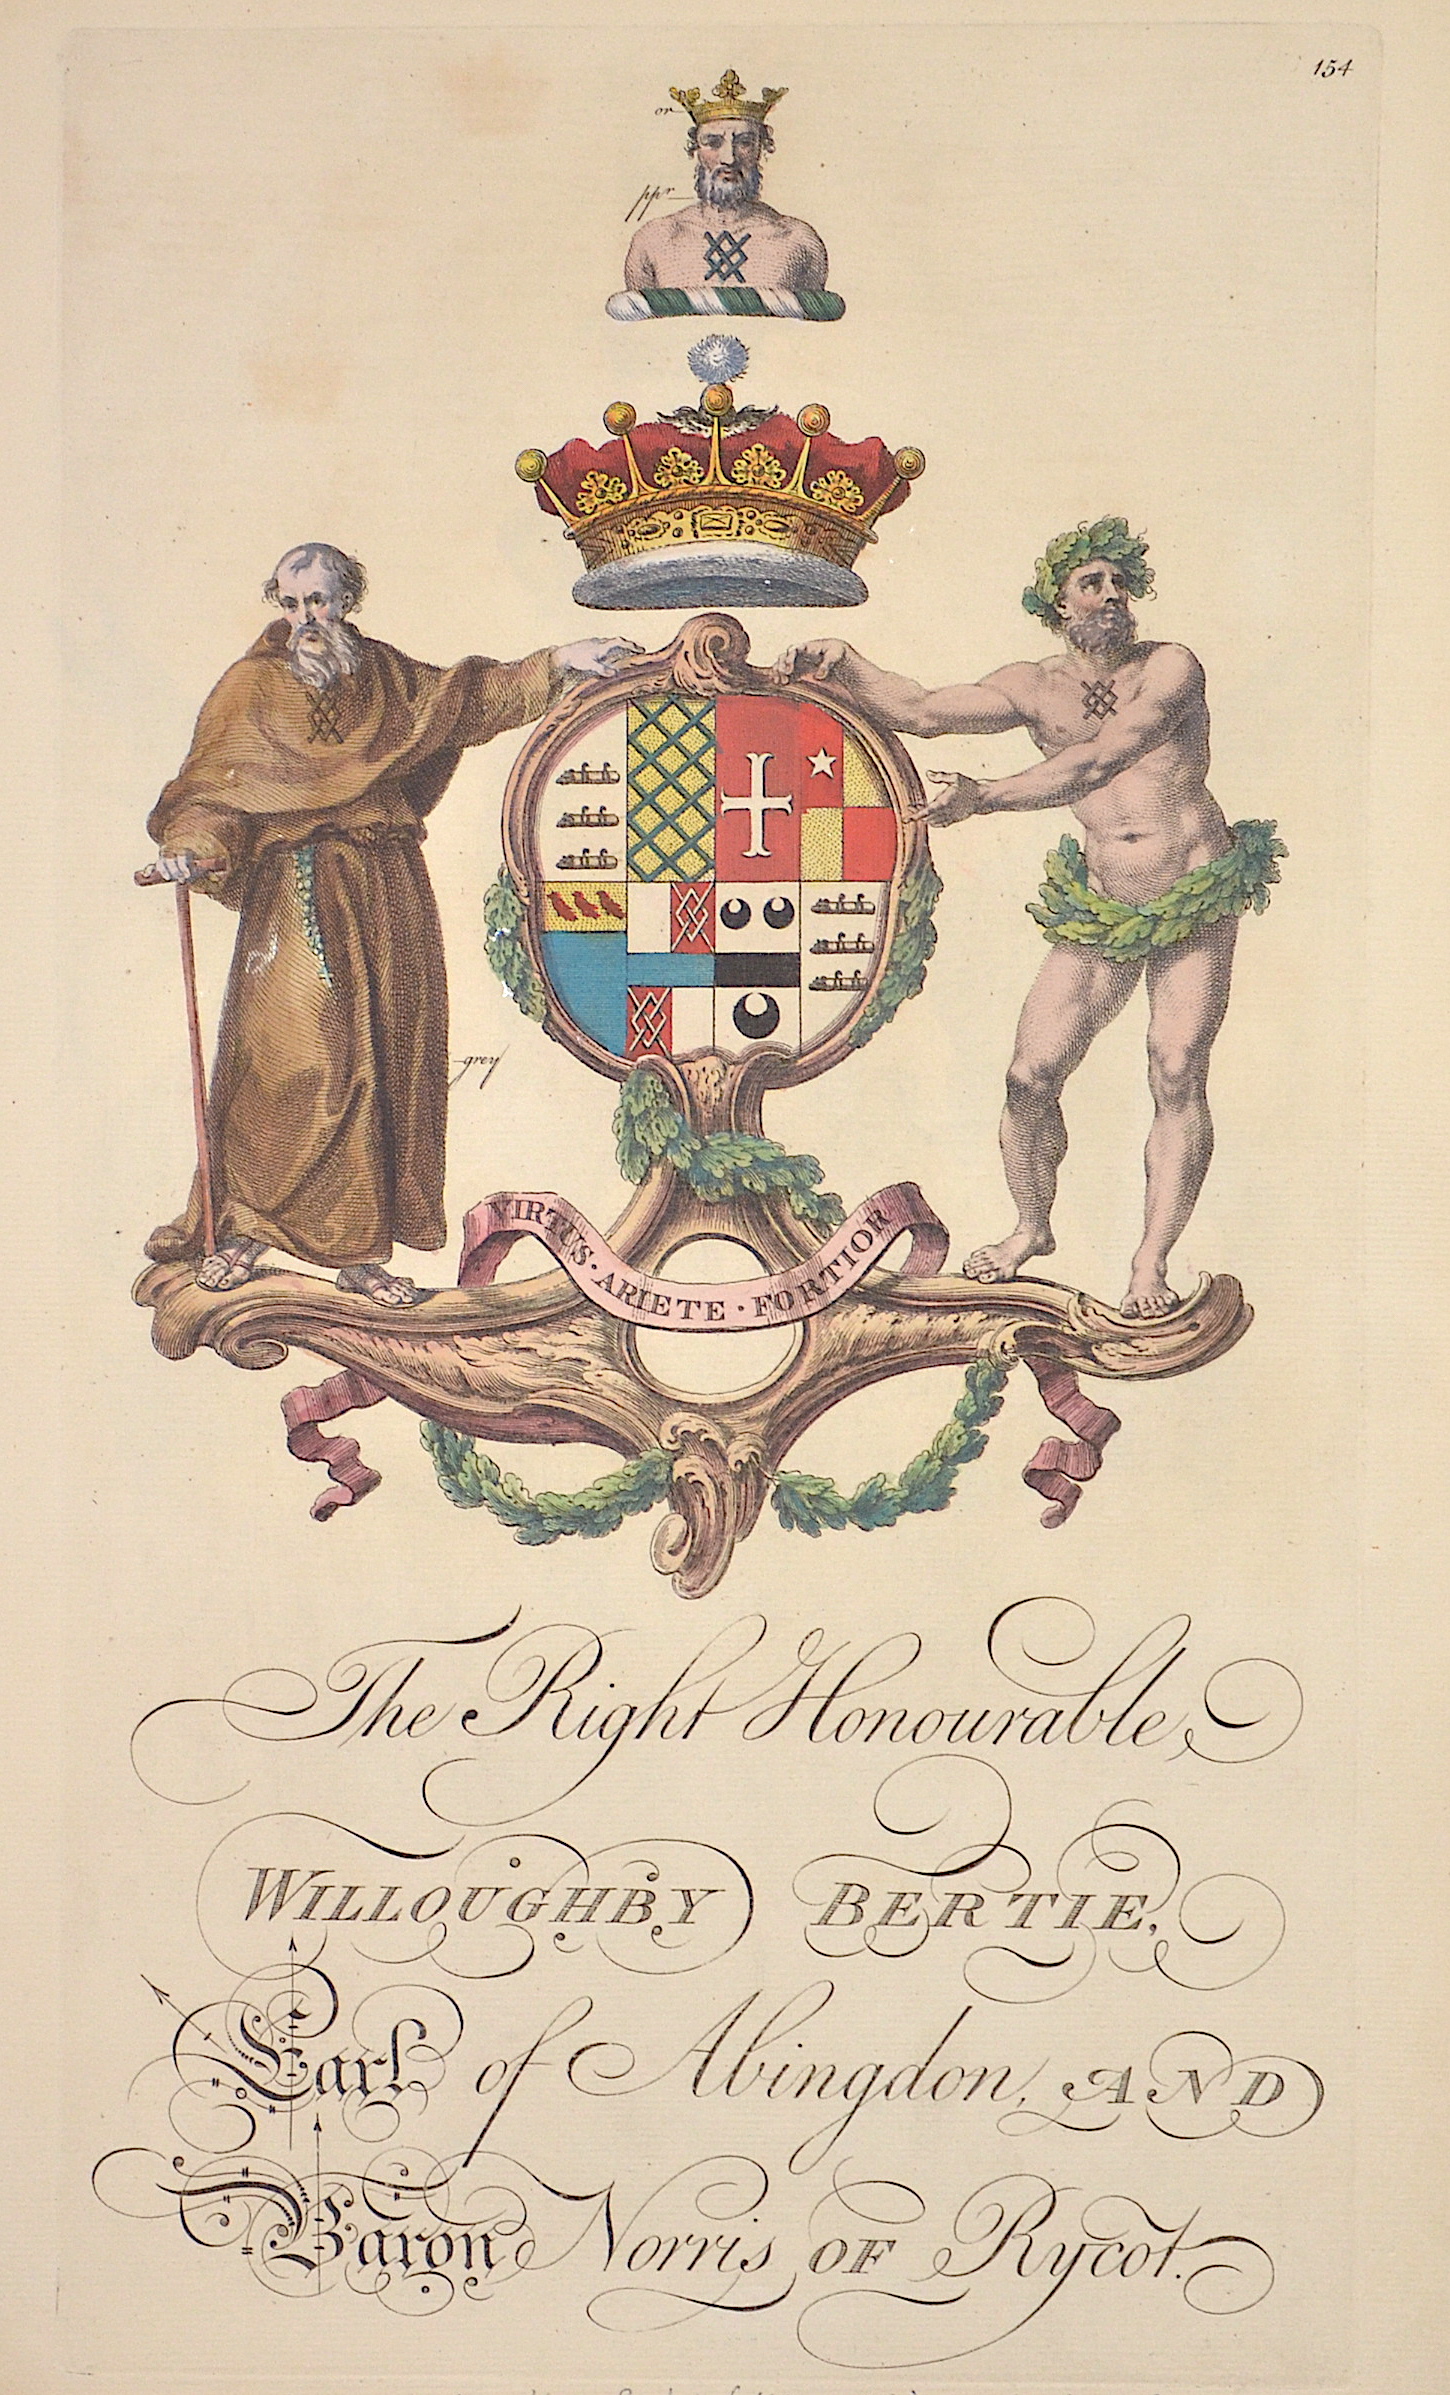 Edmondson Joseph The Right Honourable Willoughby Bertie, Earl of Abingdon, and Baron Norris of Rycot.